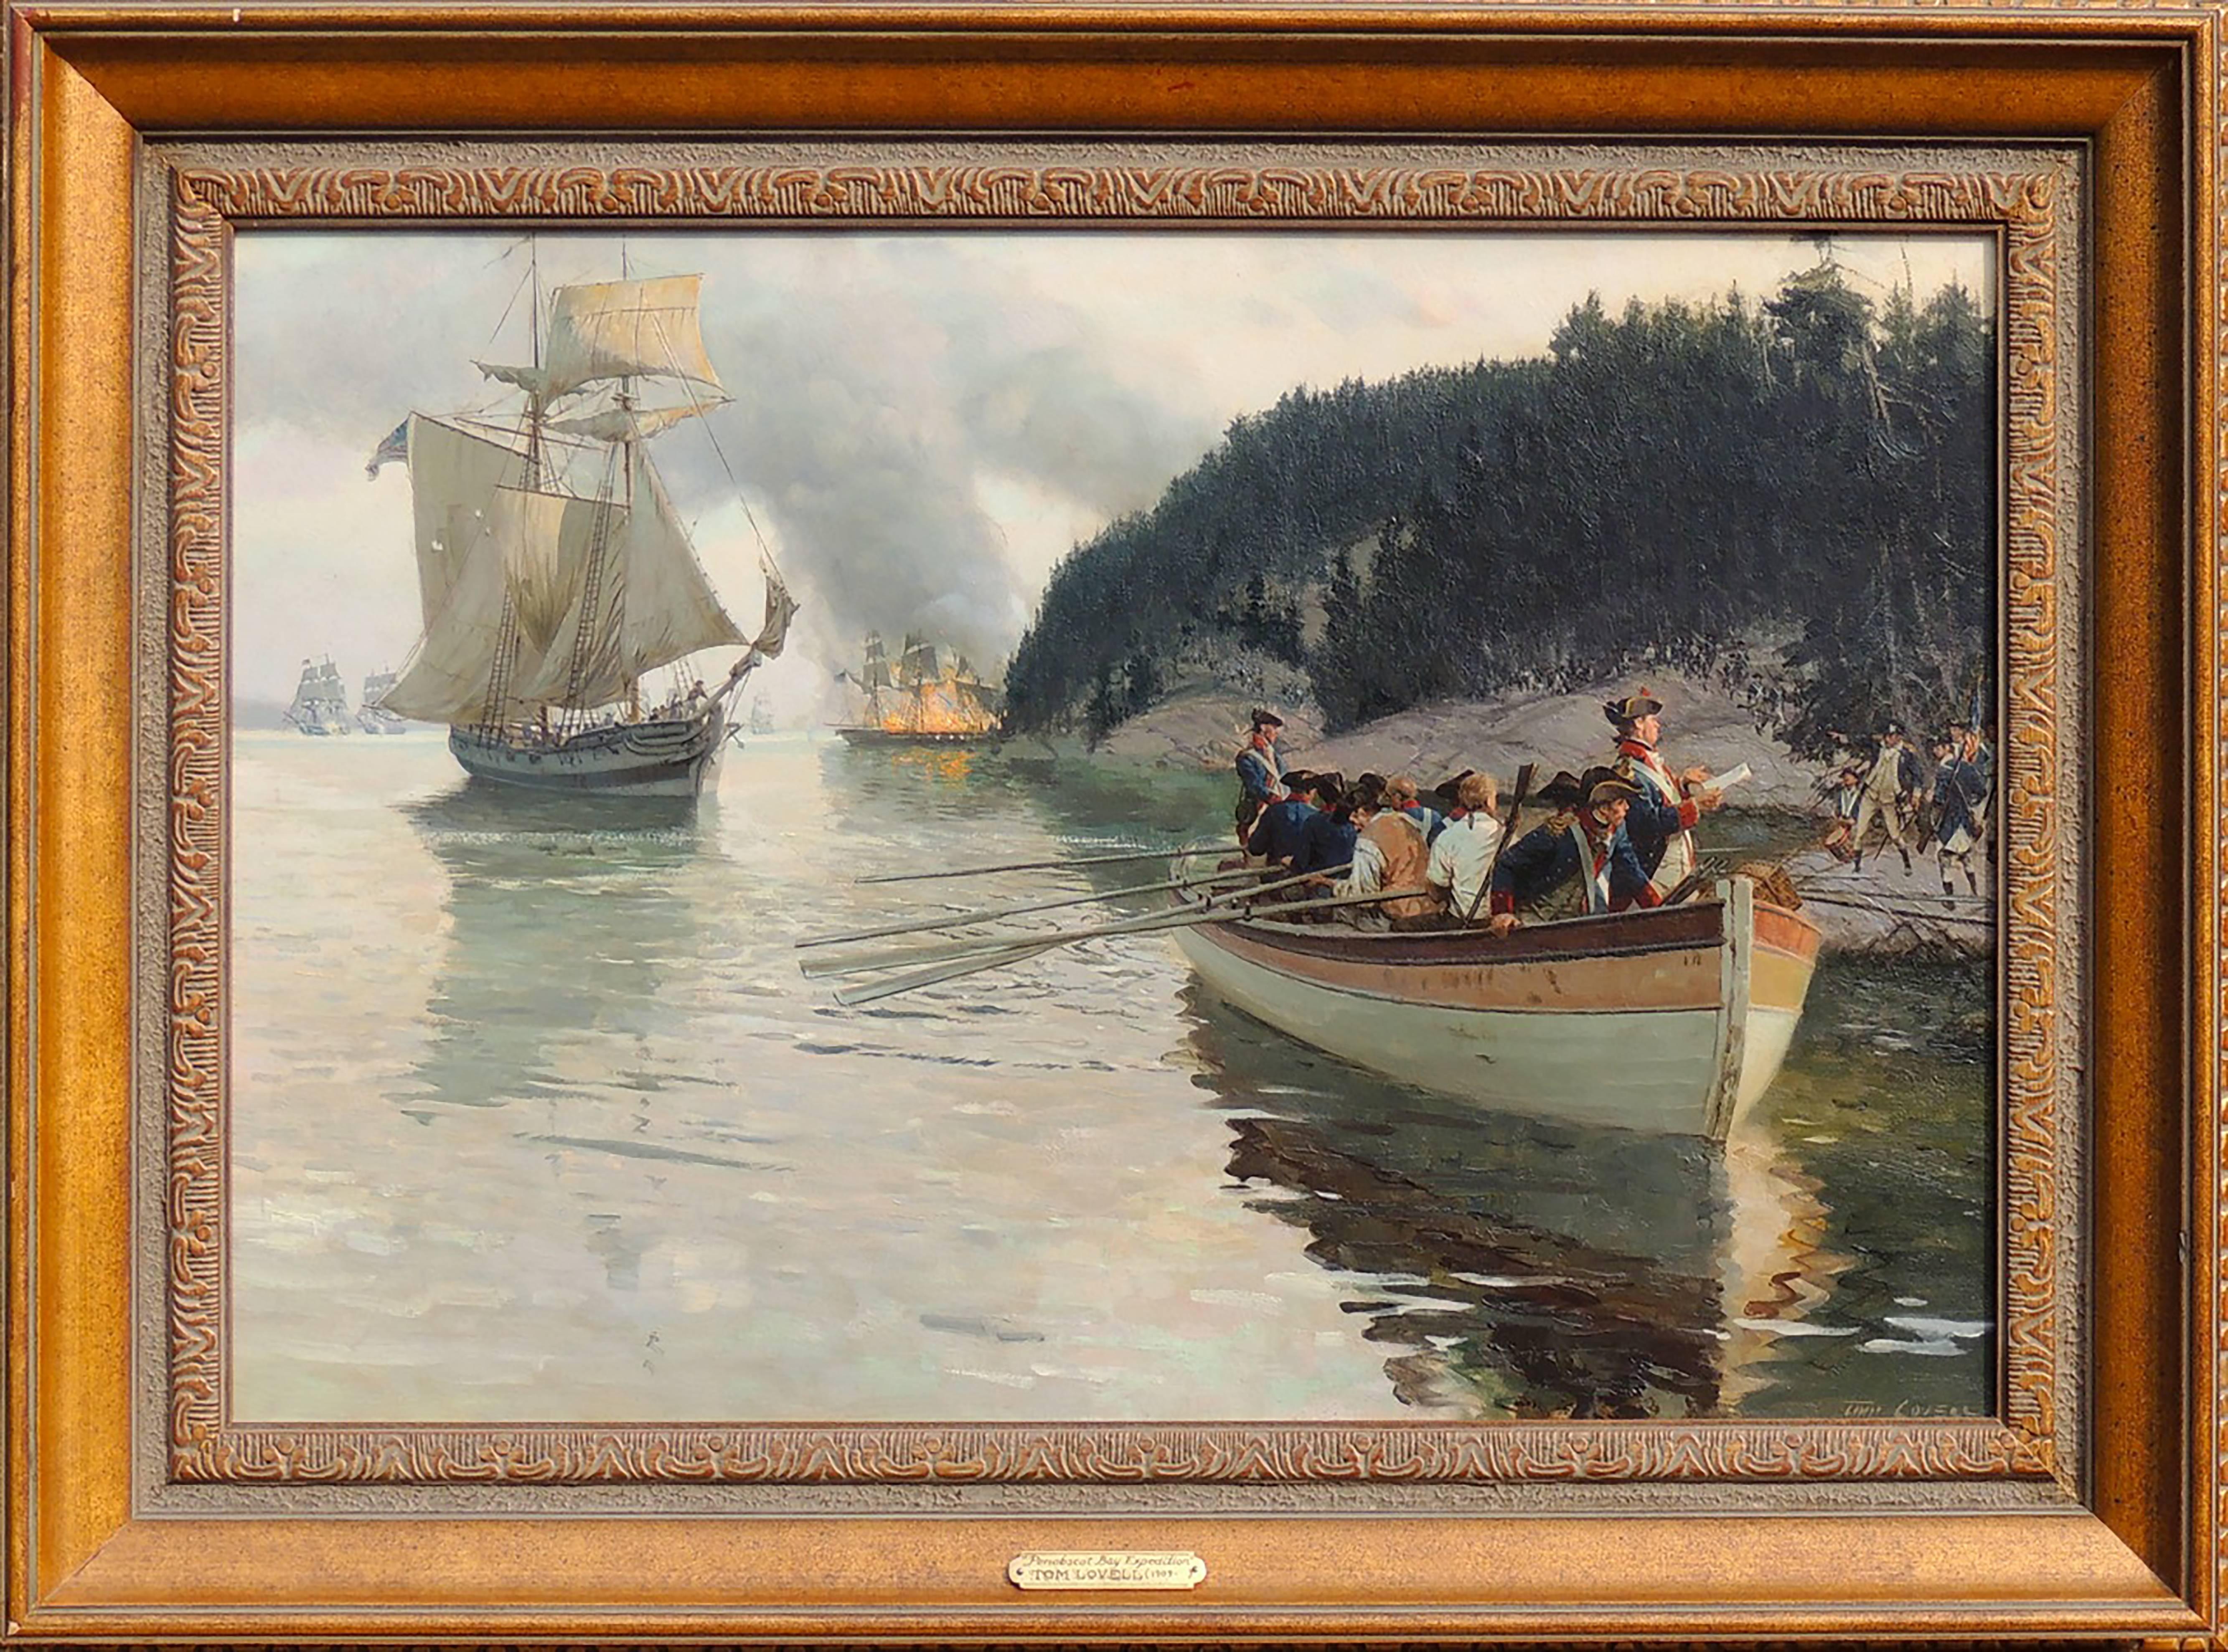 Penobscot Bay Expedition - Painting by Tom Lovell